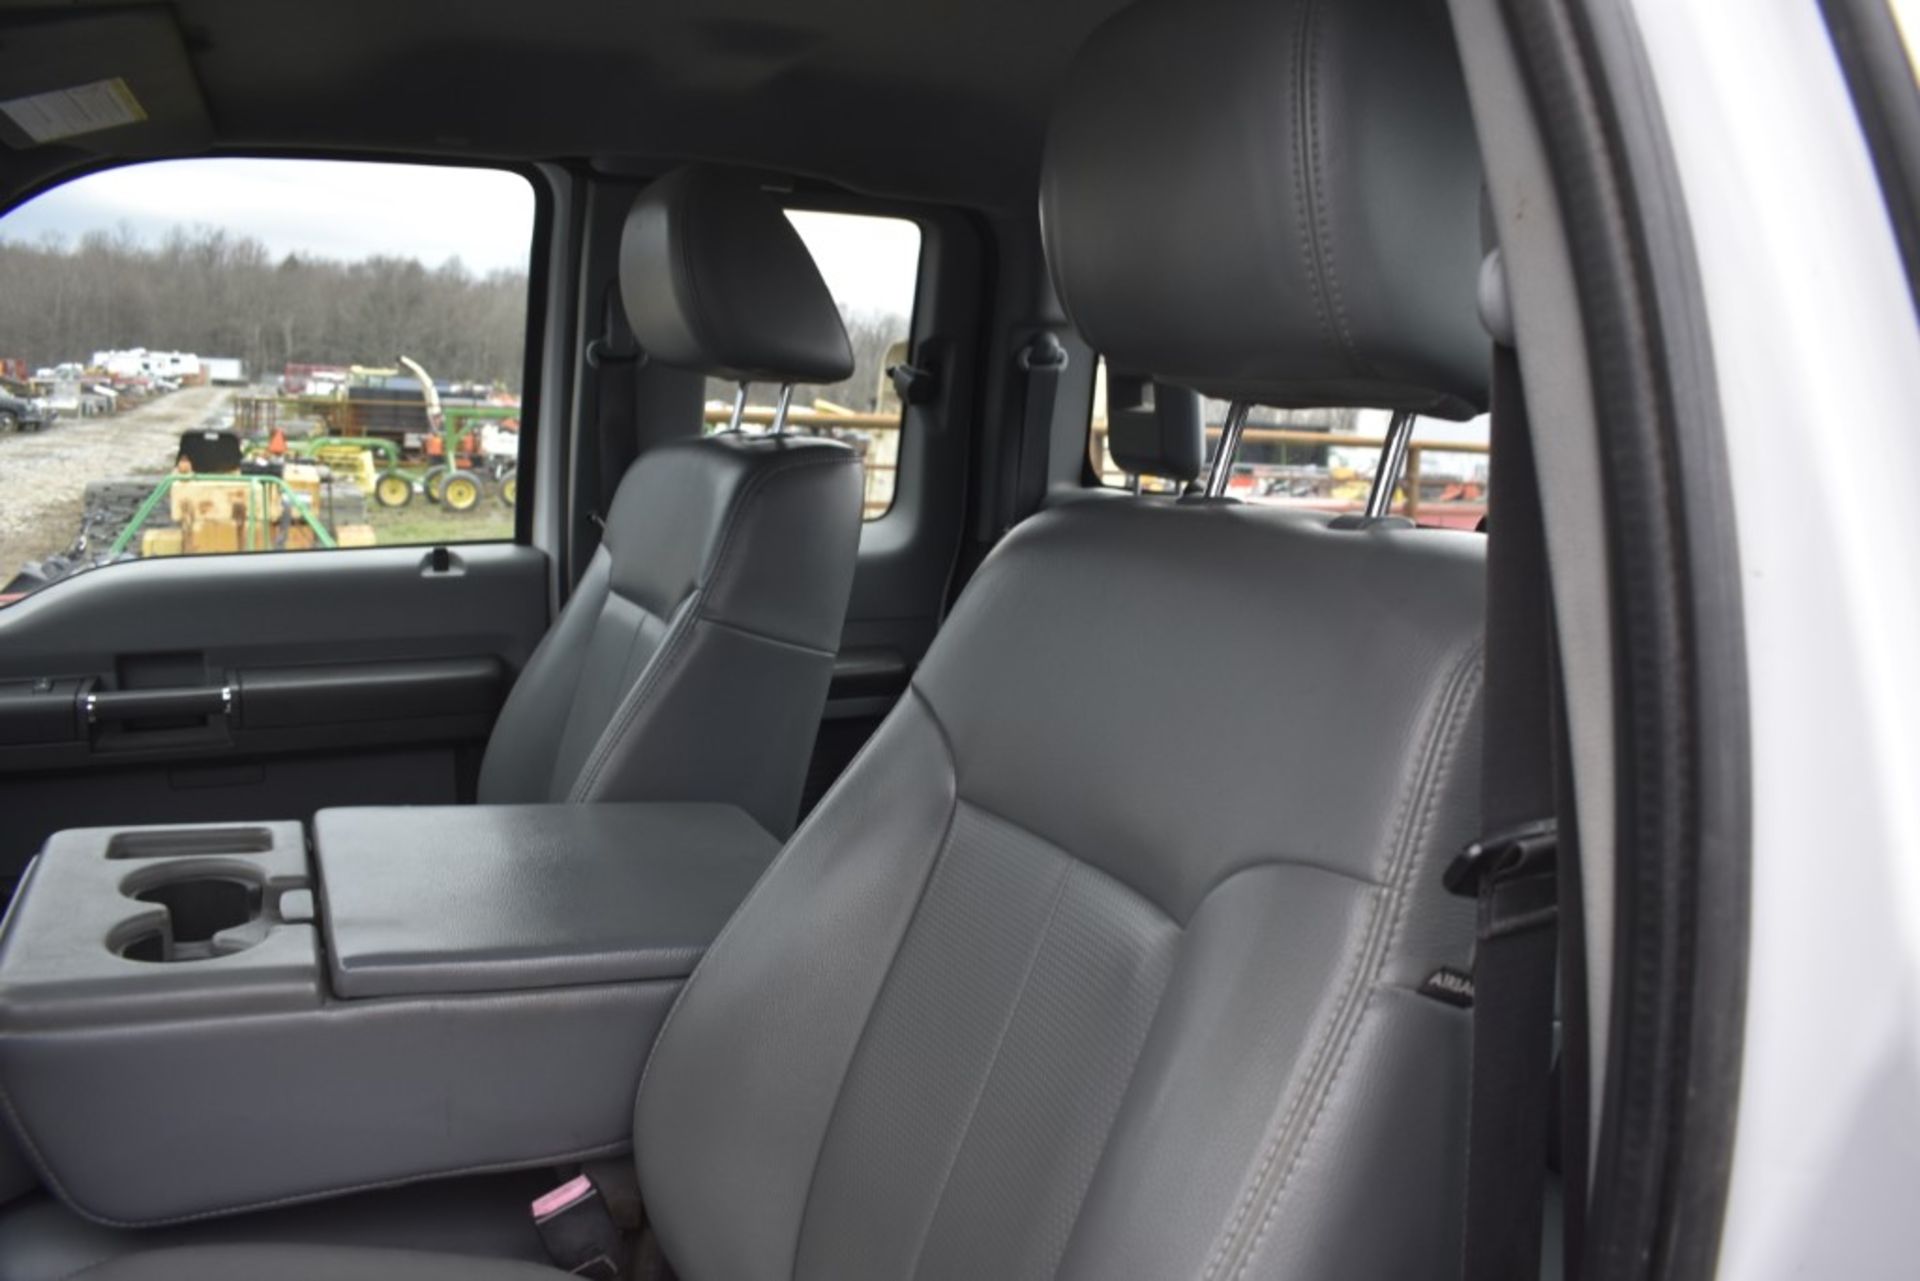 2011 Ford F-250 Super Duty Truck - Image 32 of 40